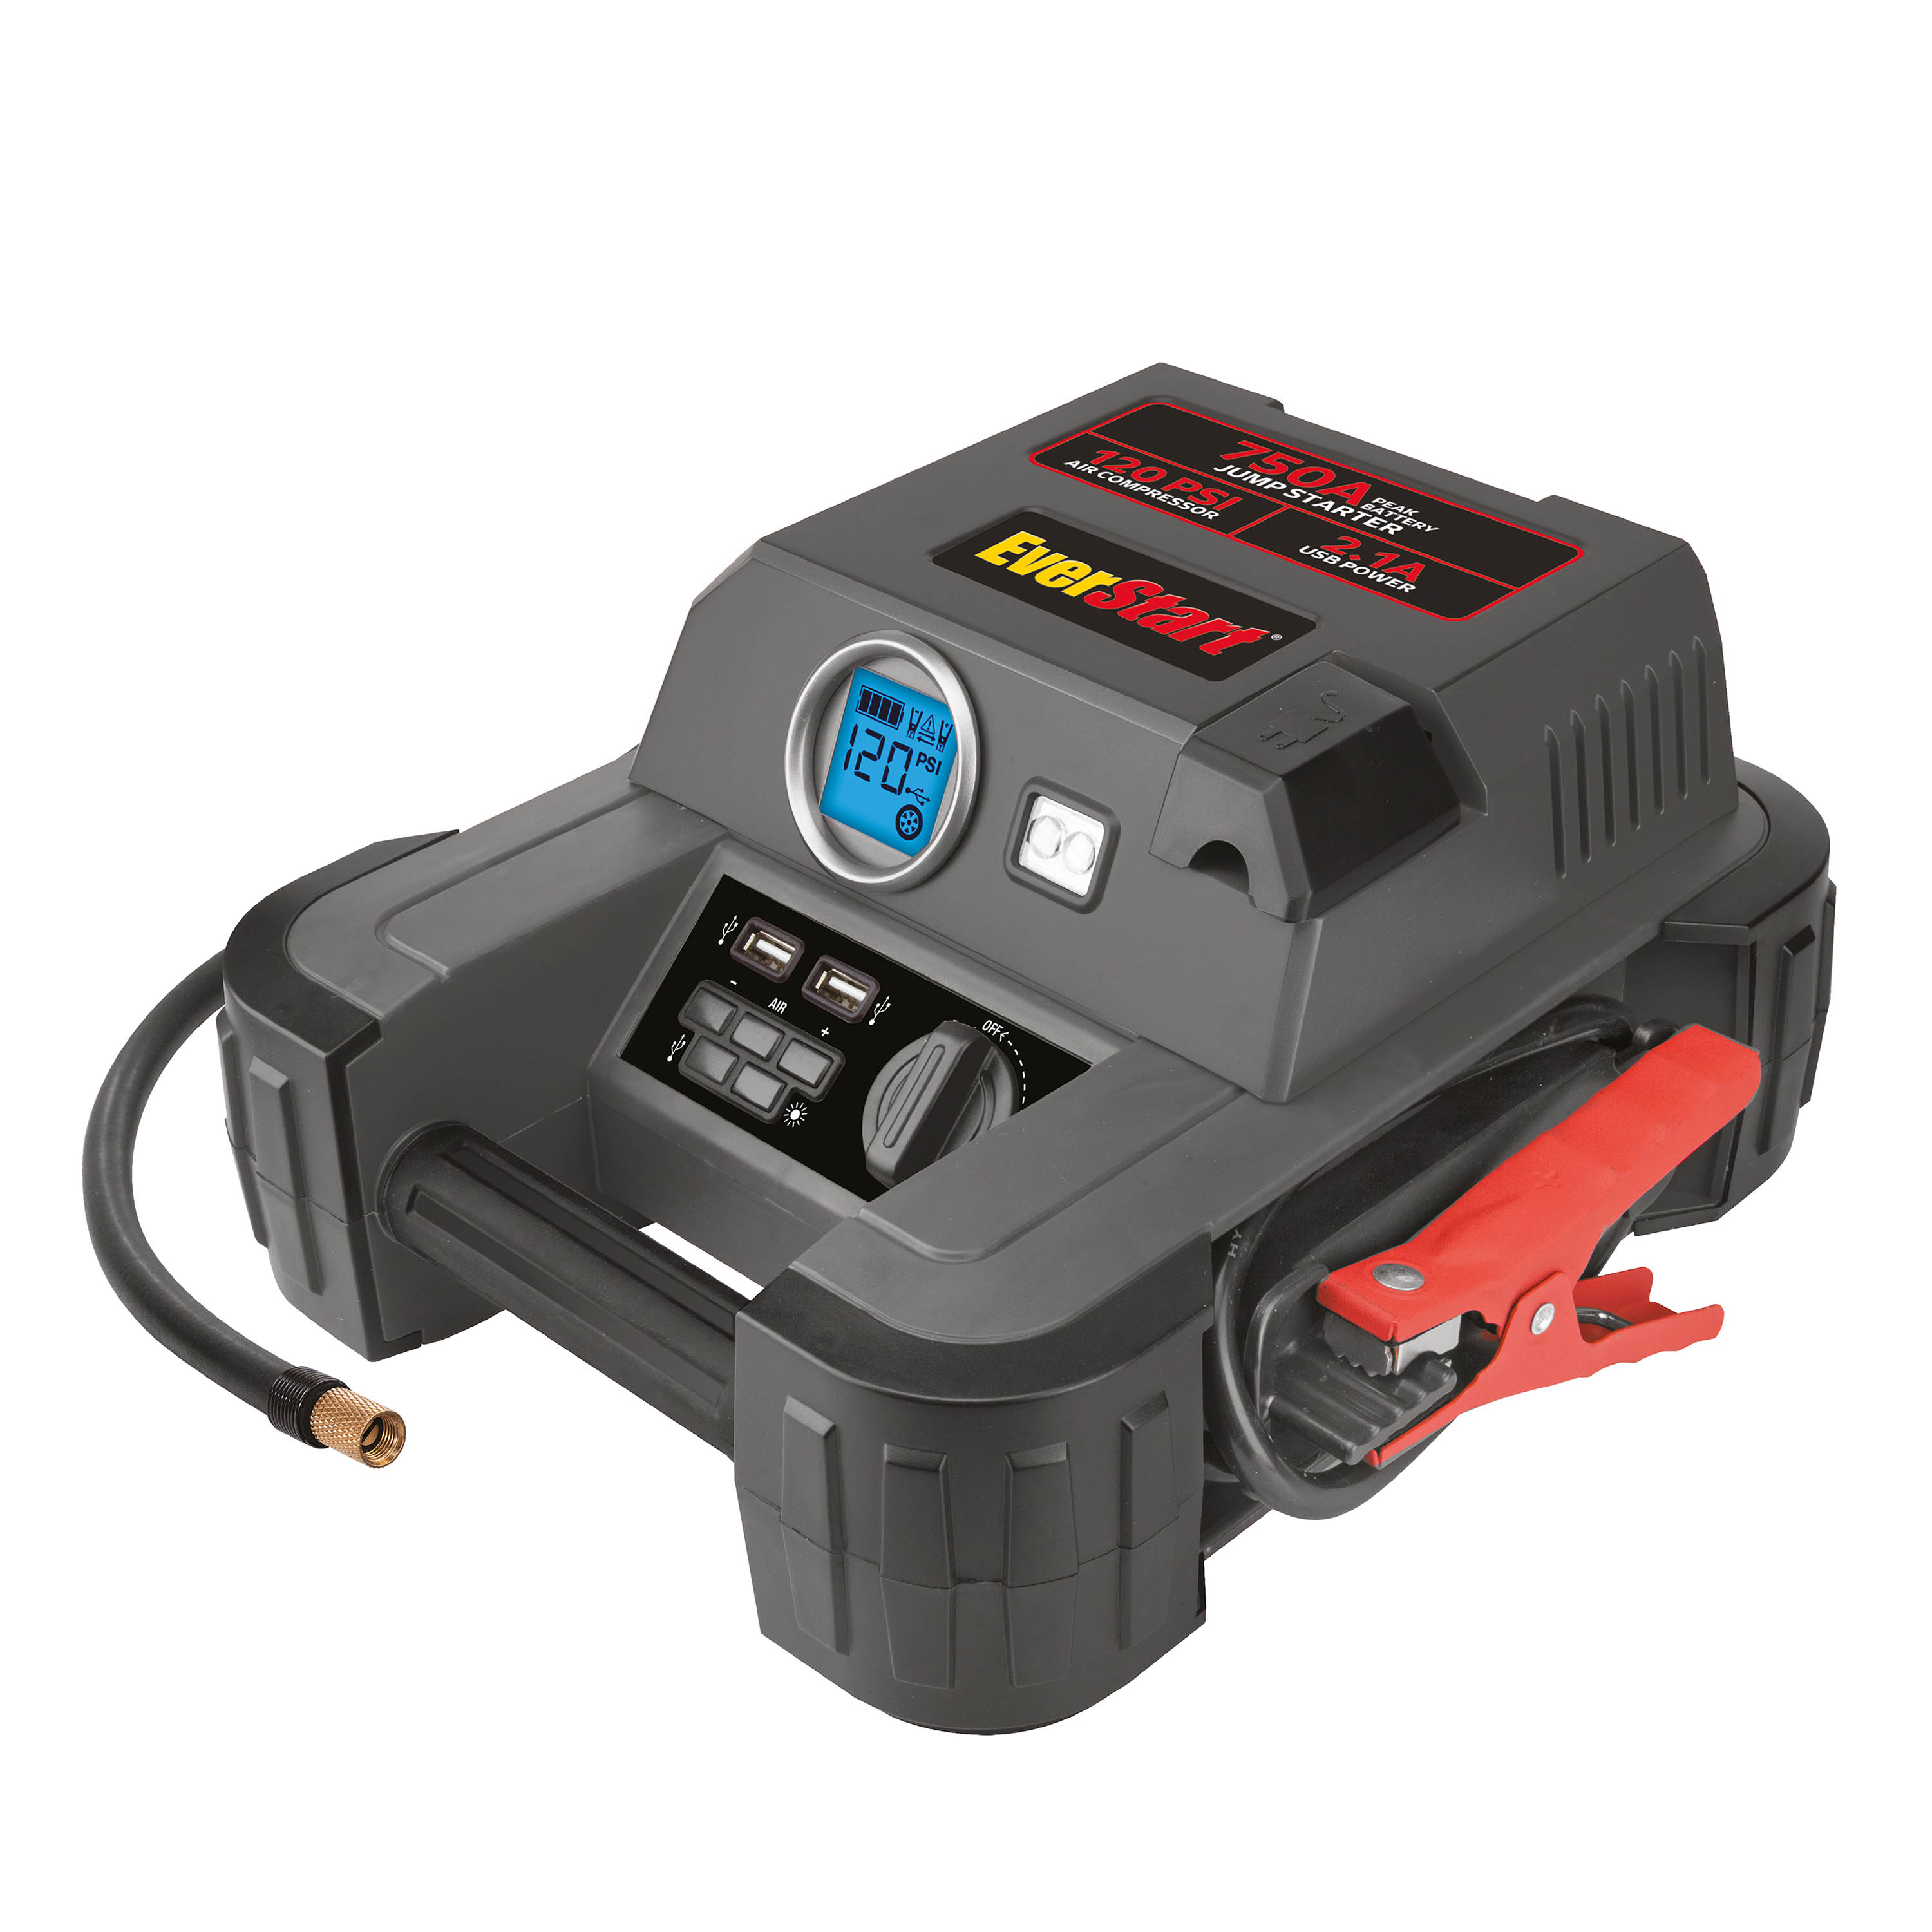 EverStart 750A Jump Starter with Reverse Polarity Alarm, 120 PSI Digital Compressor, Clamps Included - image 1 of 6